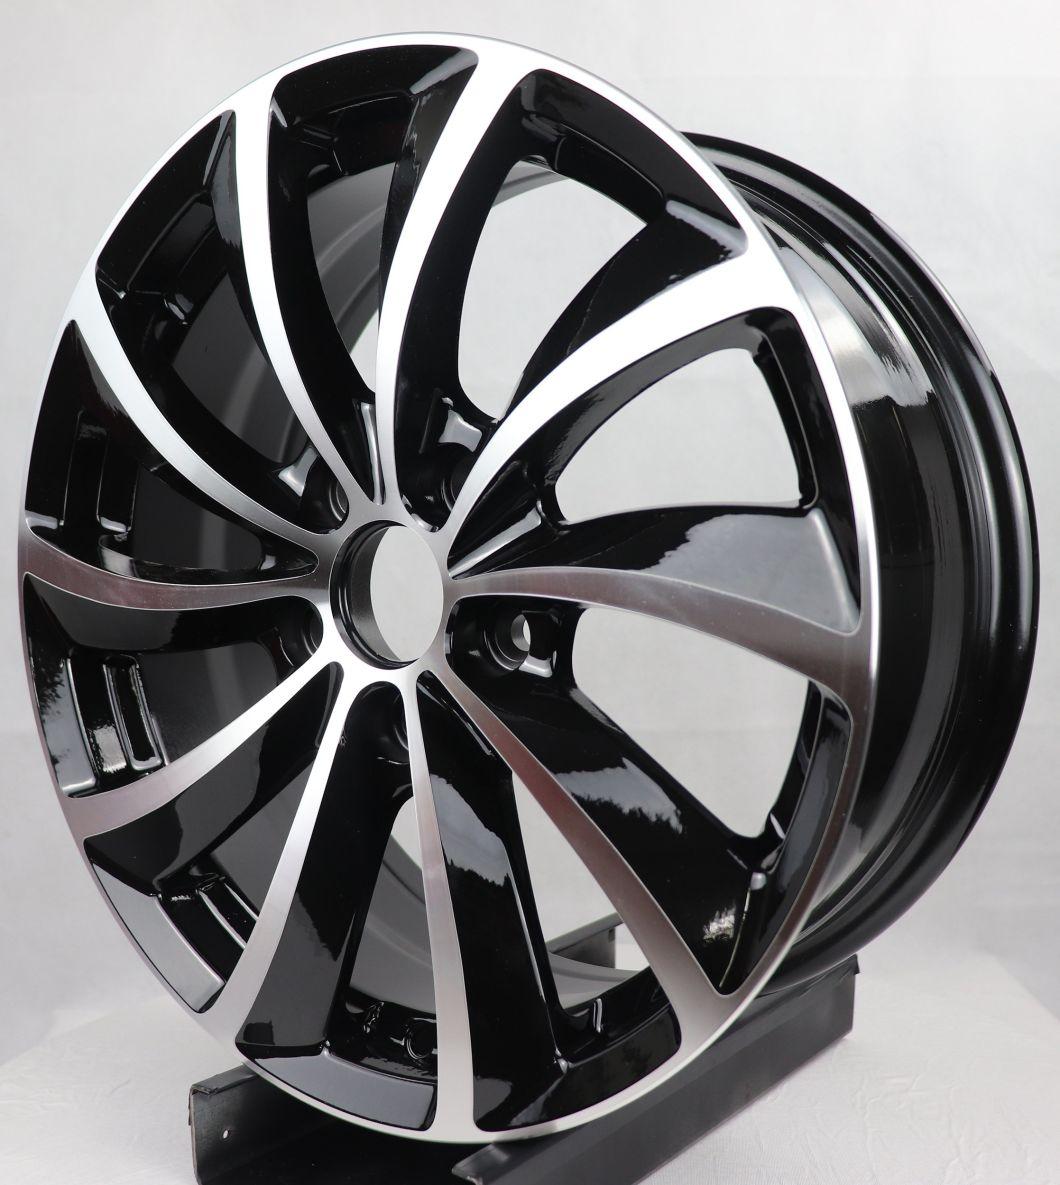 Best Selling Well Polish Casting Wheels for Car